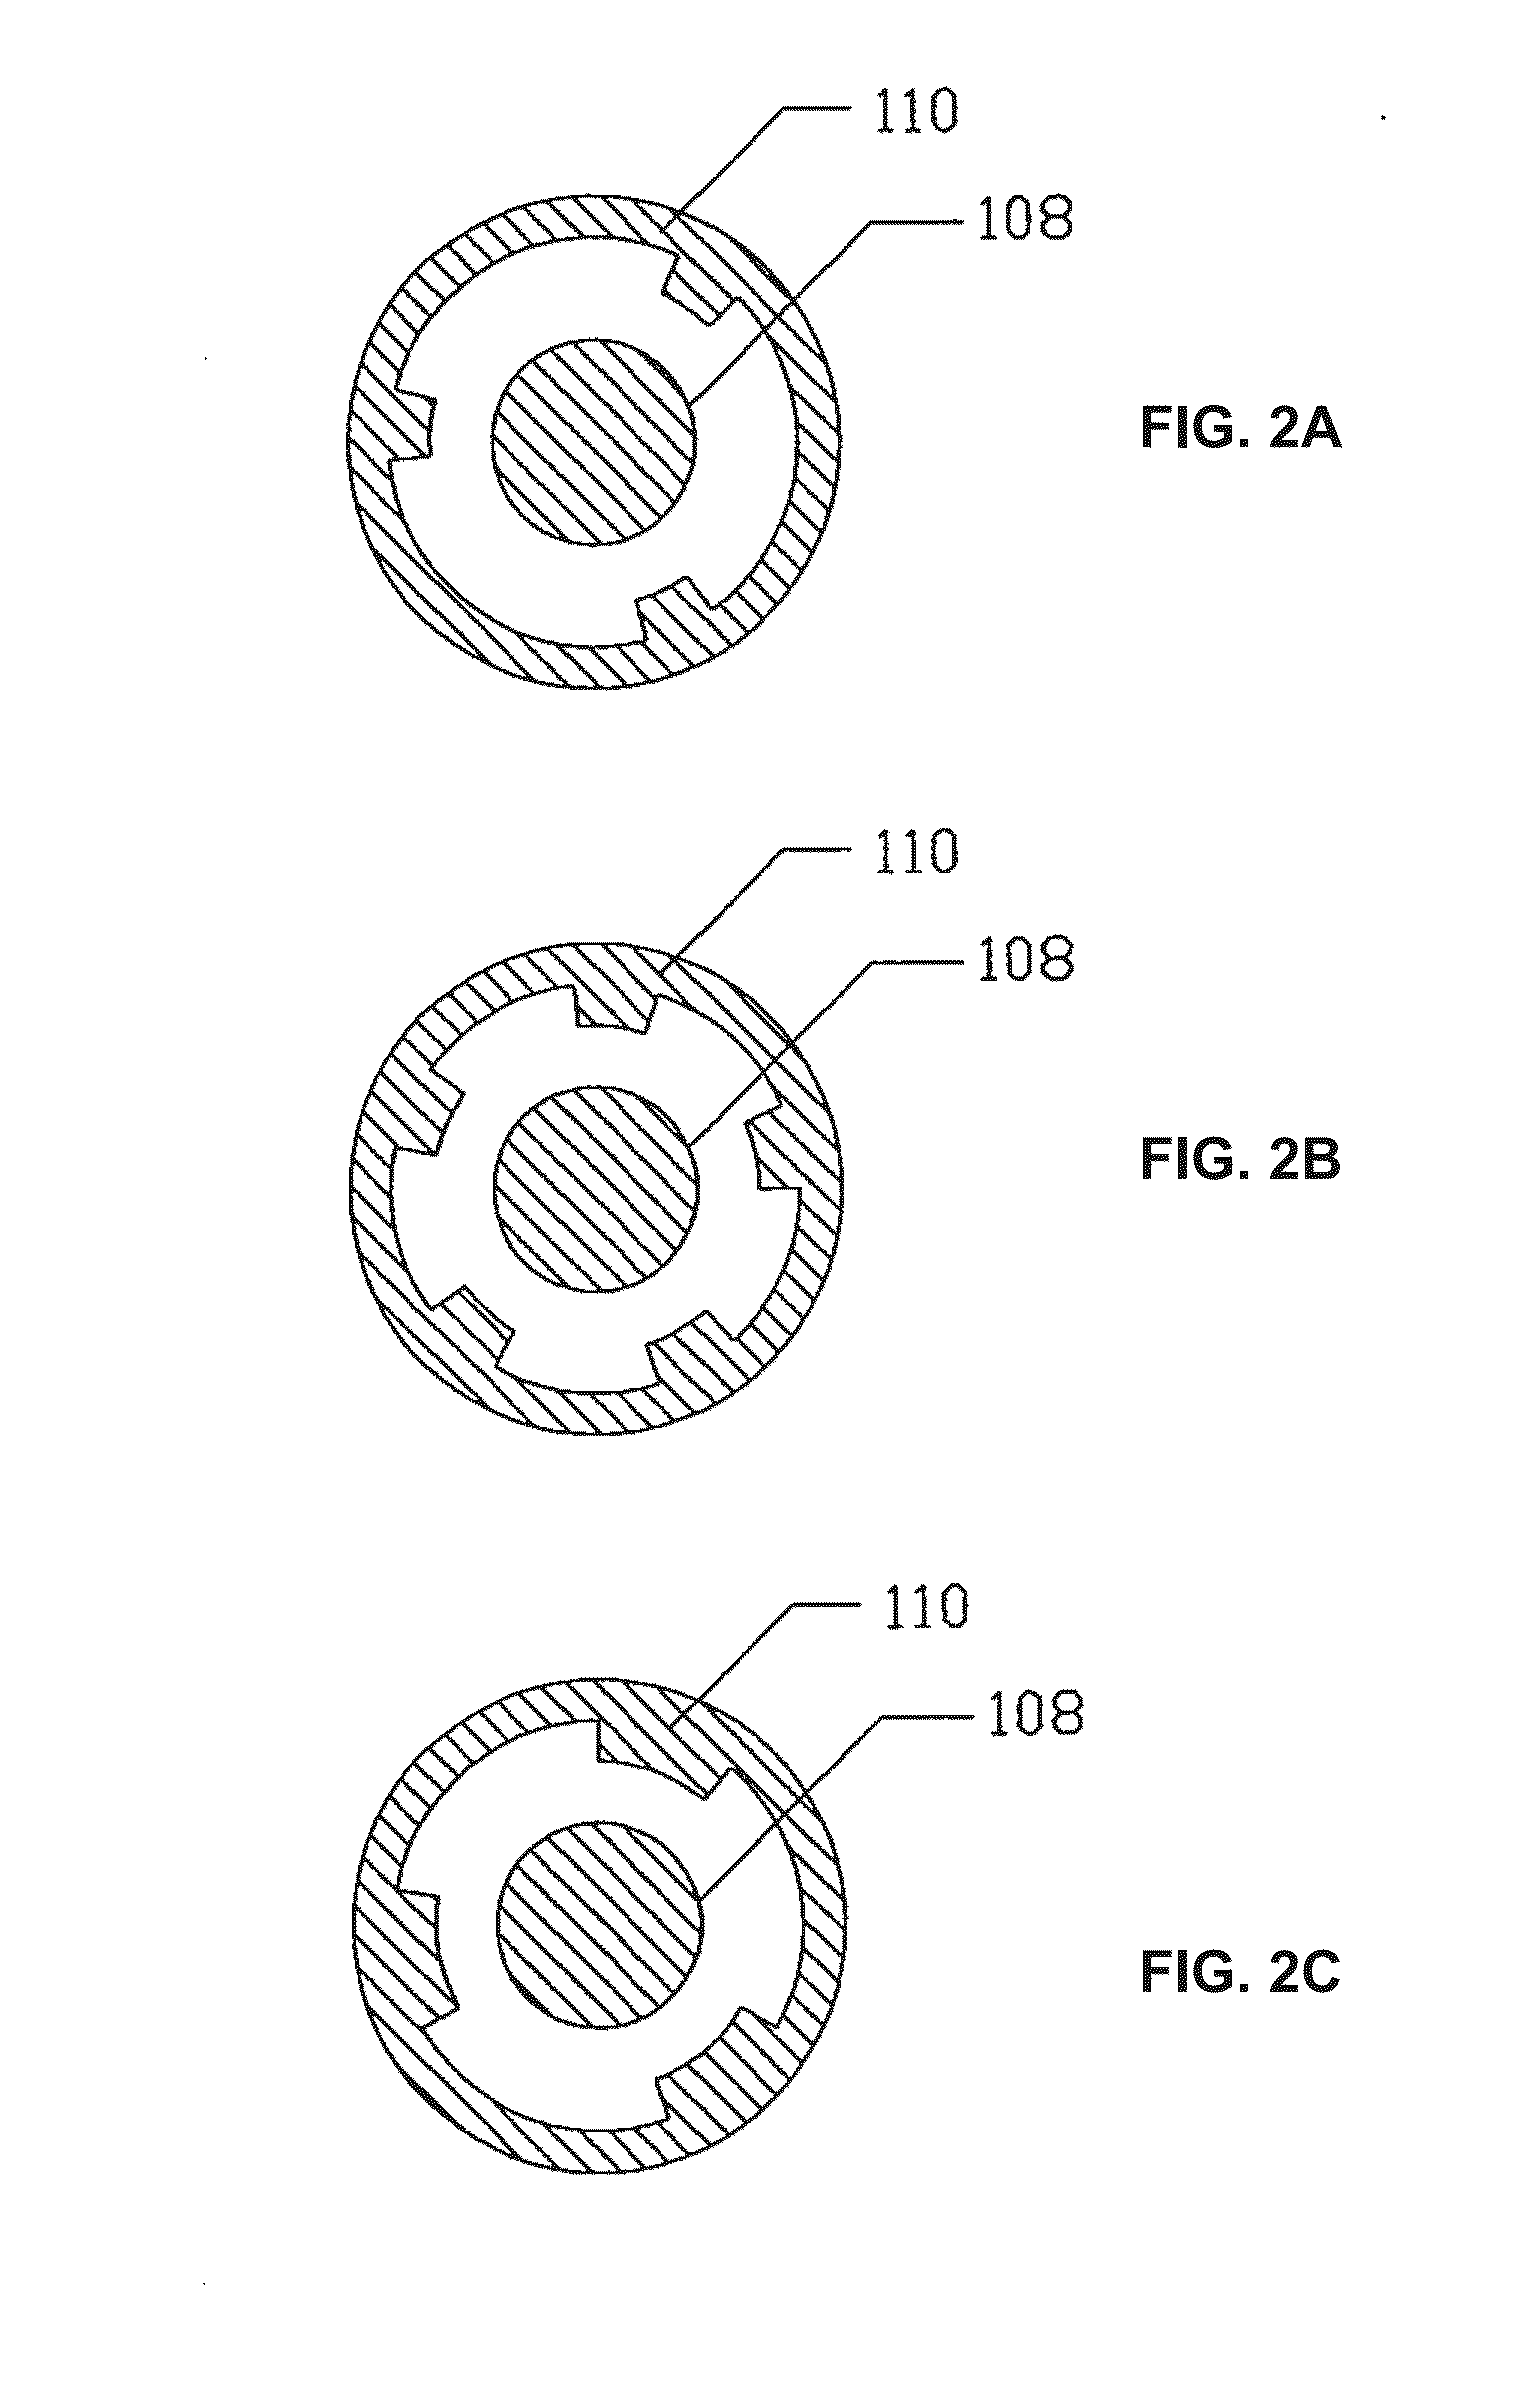 Repetitive Pulsed Electric Discharge Apparatuses and Methods of Use